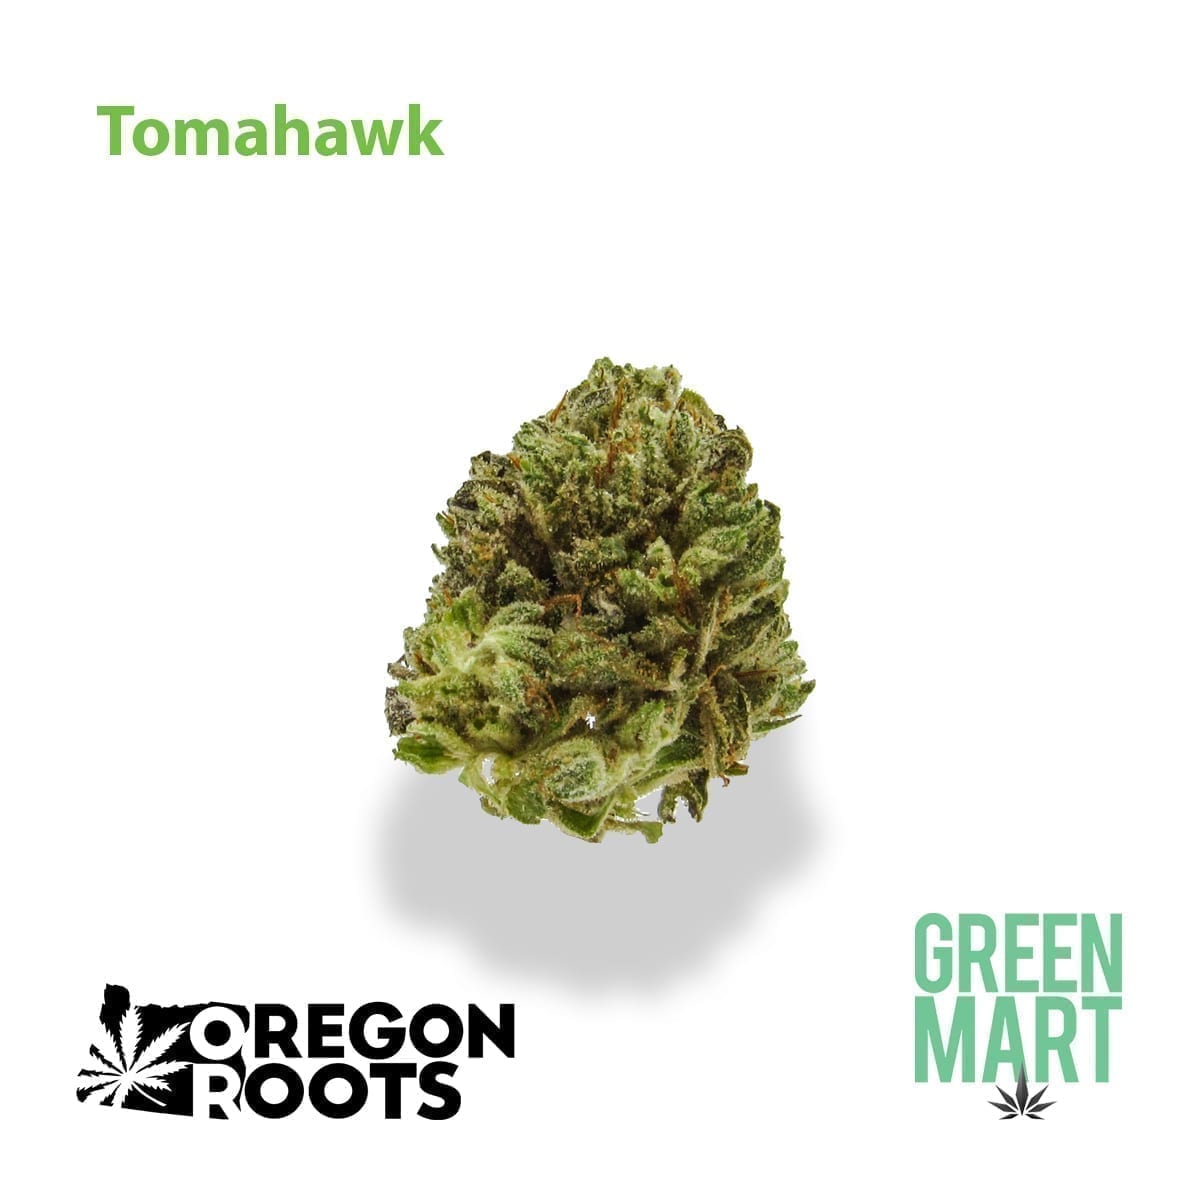 Tomahawk by Oregon Roots